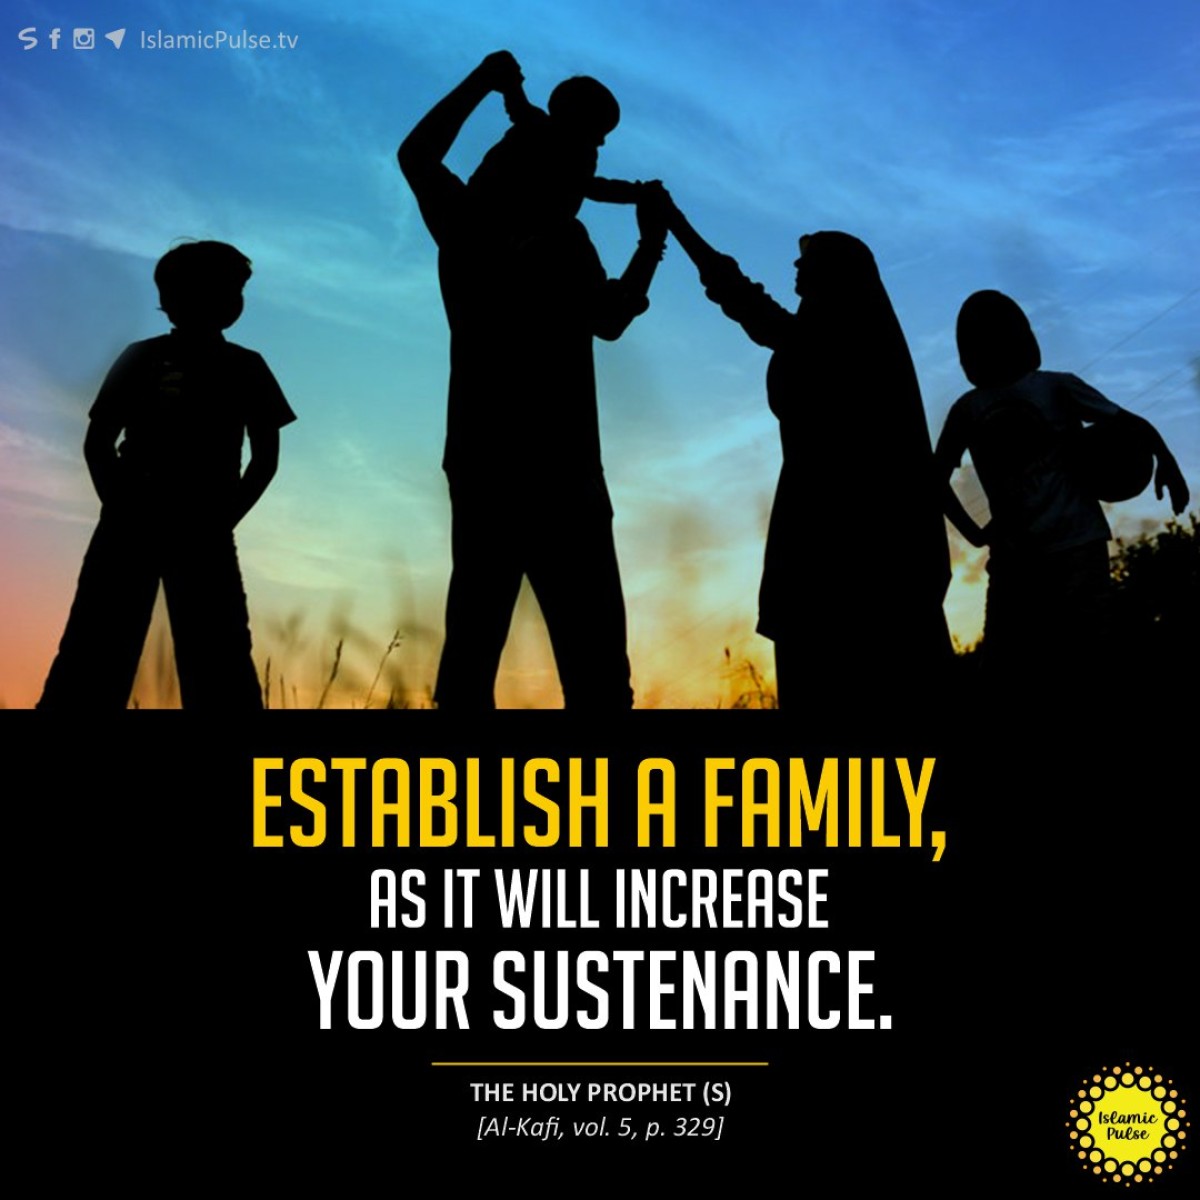 "Establish a family, as it will increase your sustenance."